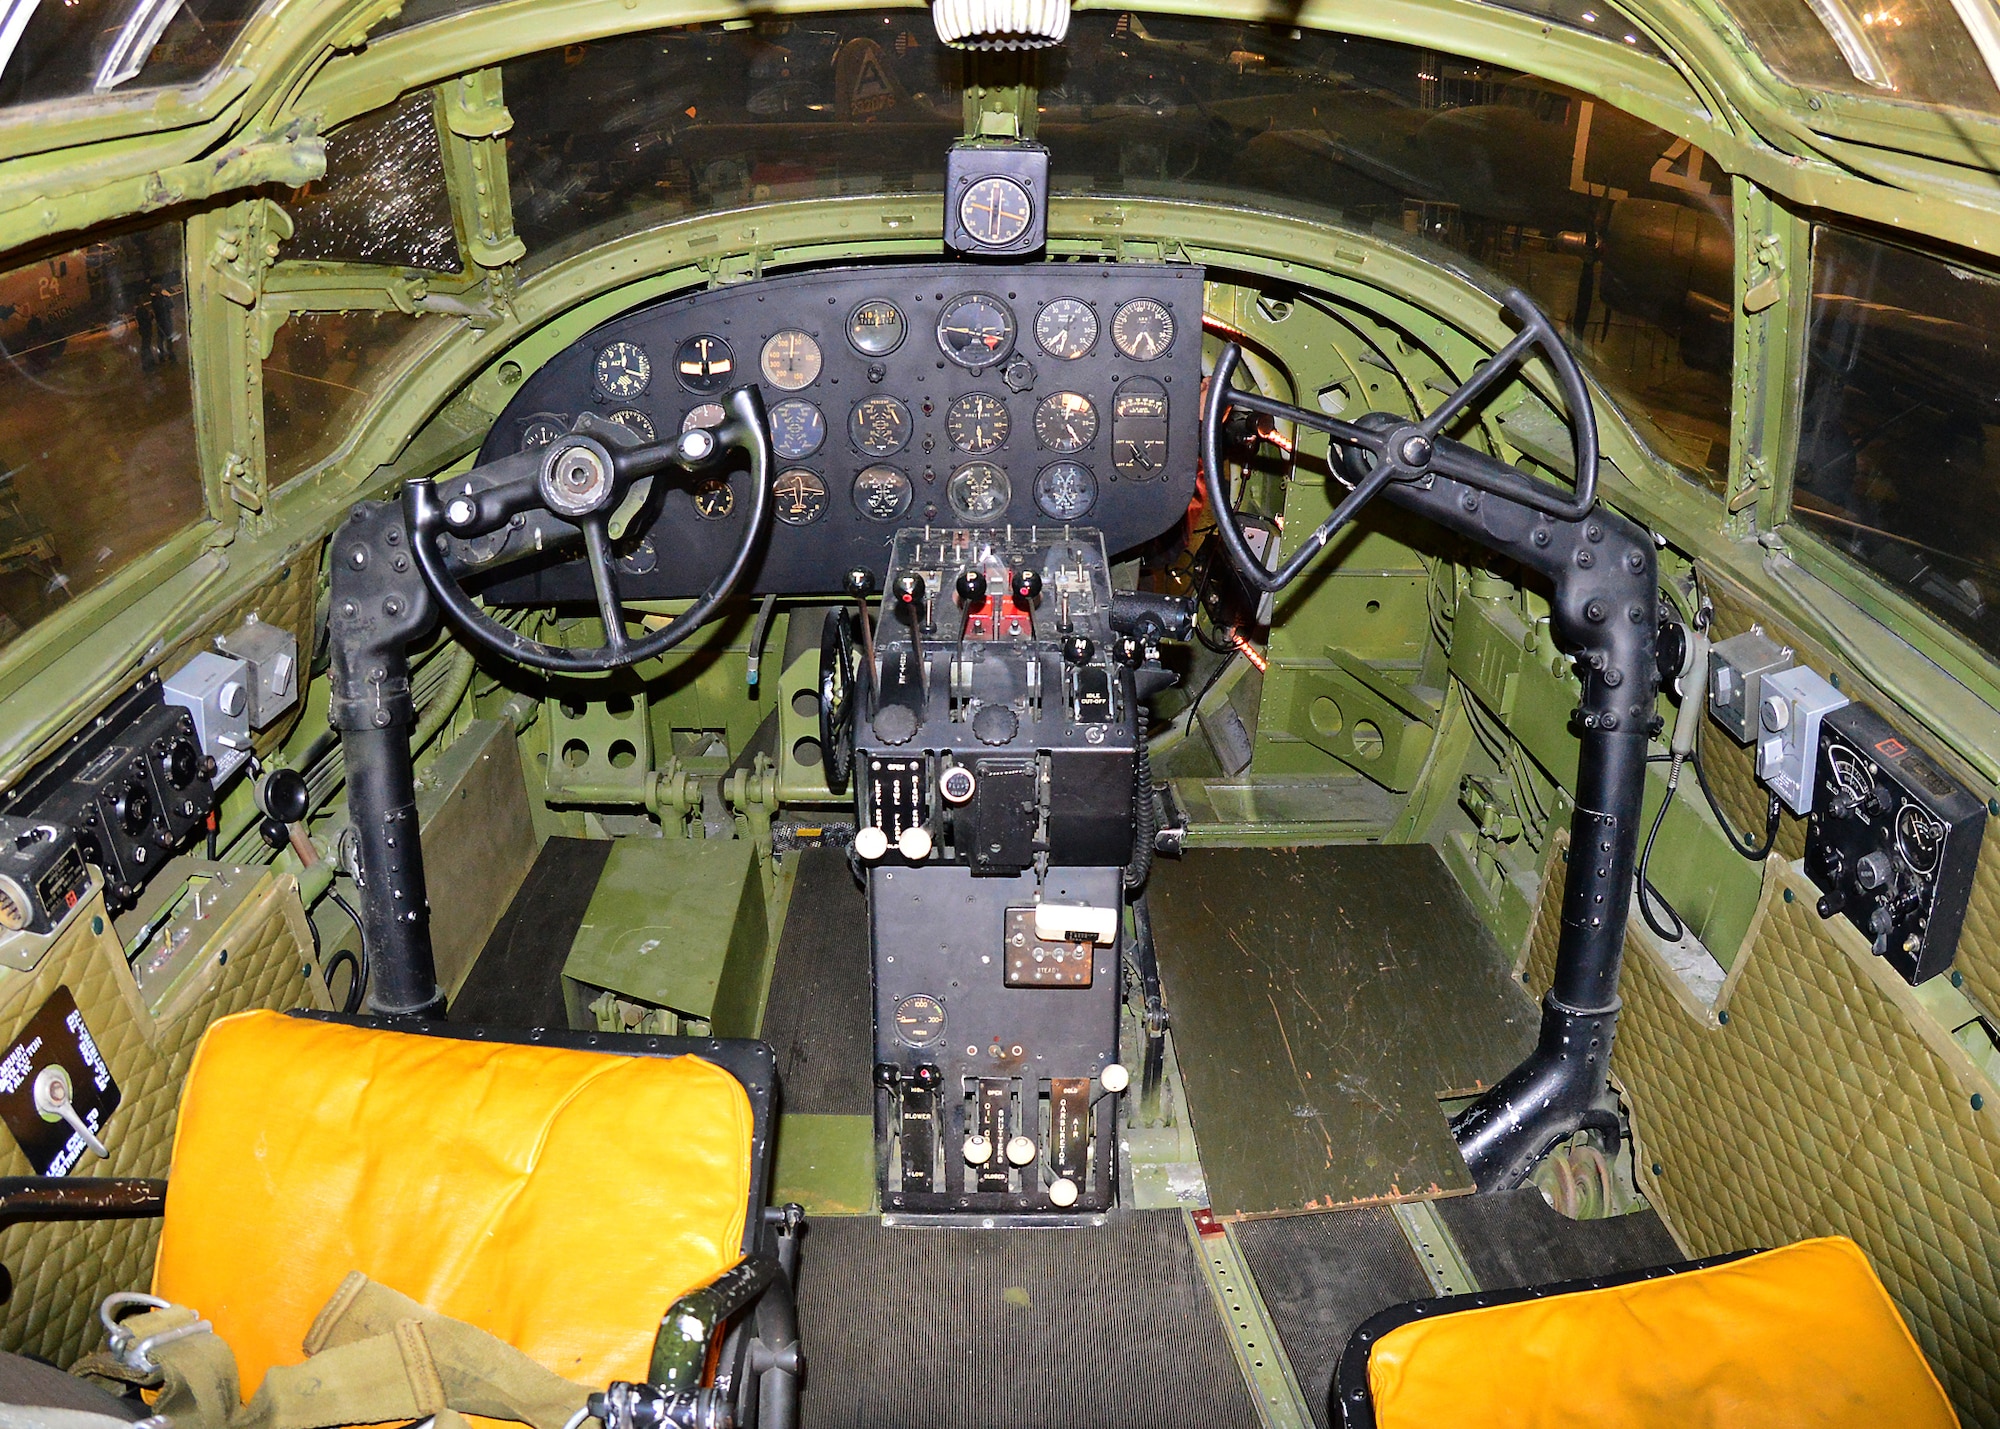 DAYTON, Ohio - Martin B-26G Marauder cockpit in the WWII Gallery at the National Museum of the U.S. Air Force. (U.S. Air Force photo by Ken LaRock)